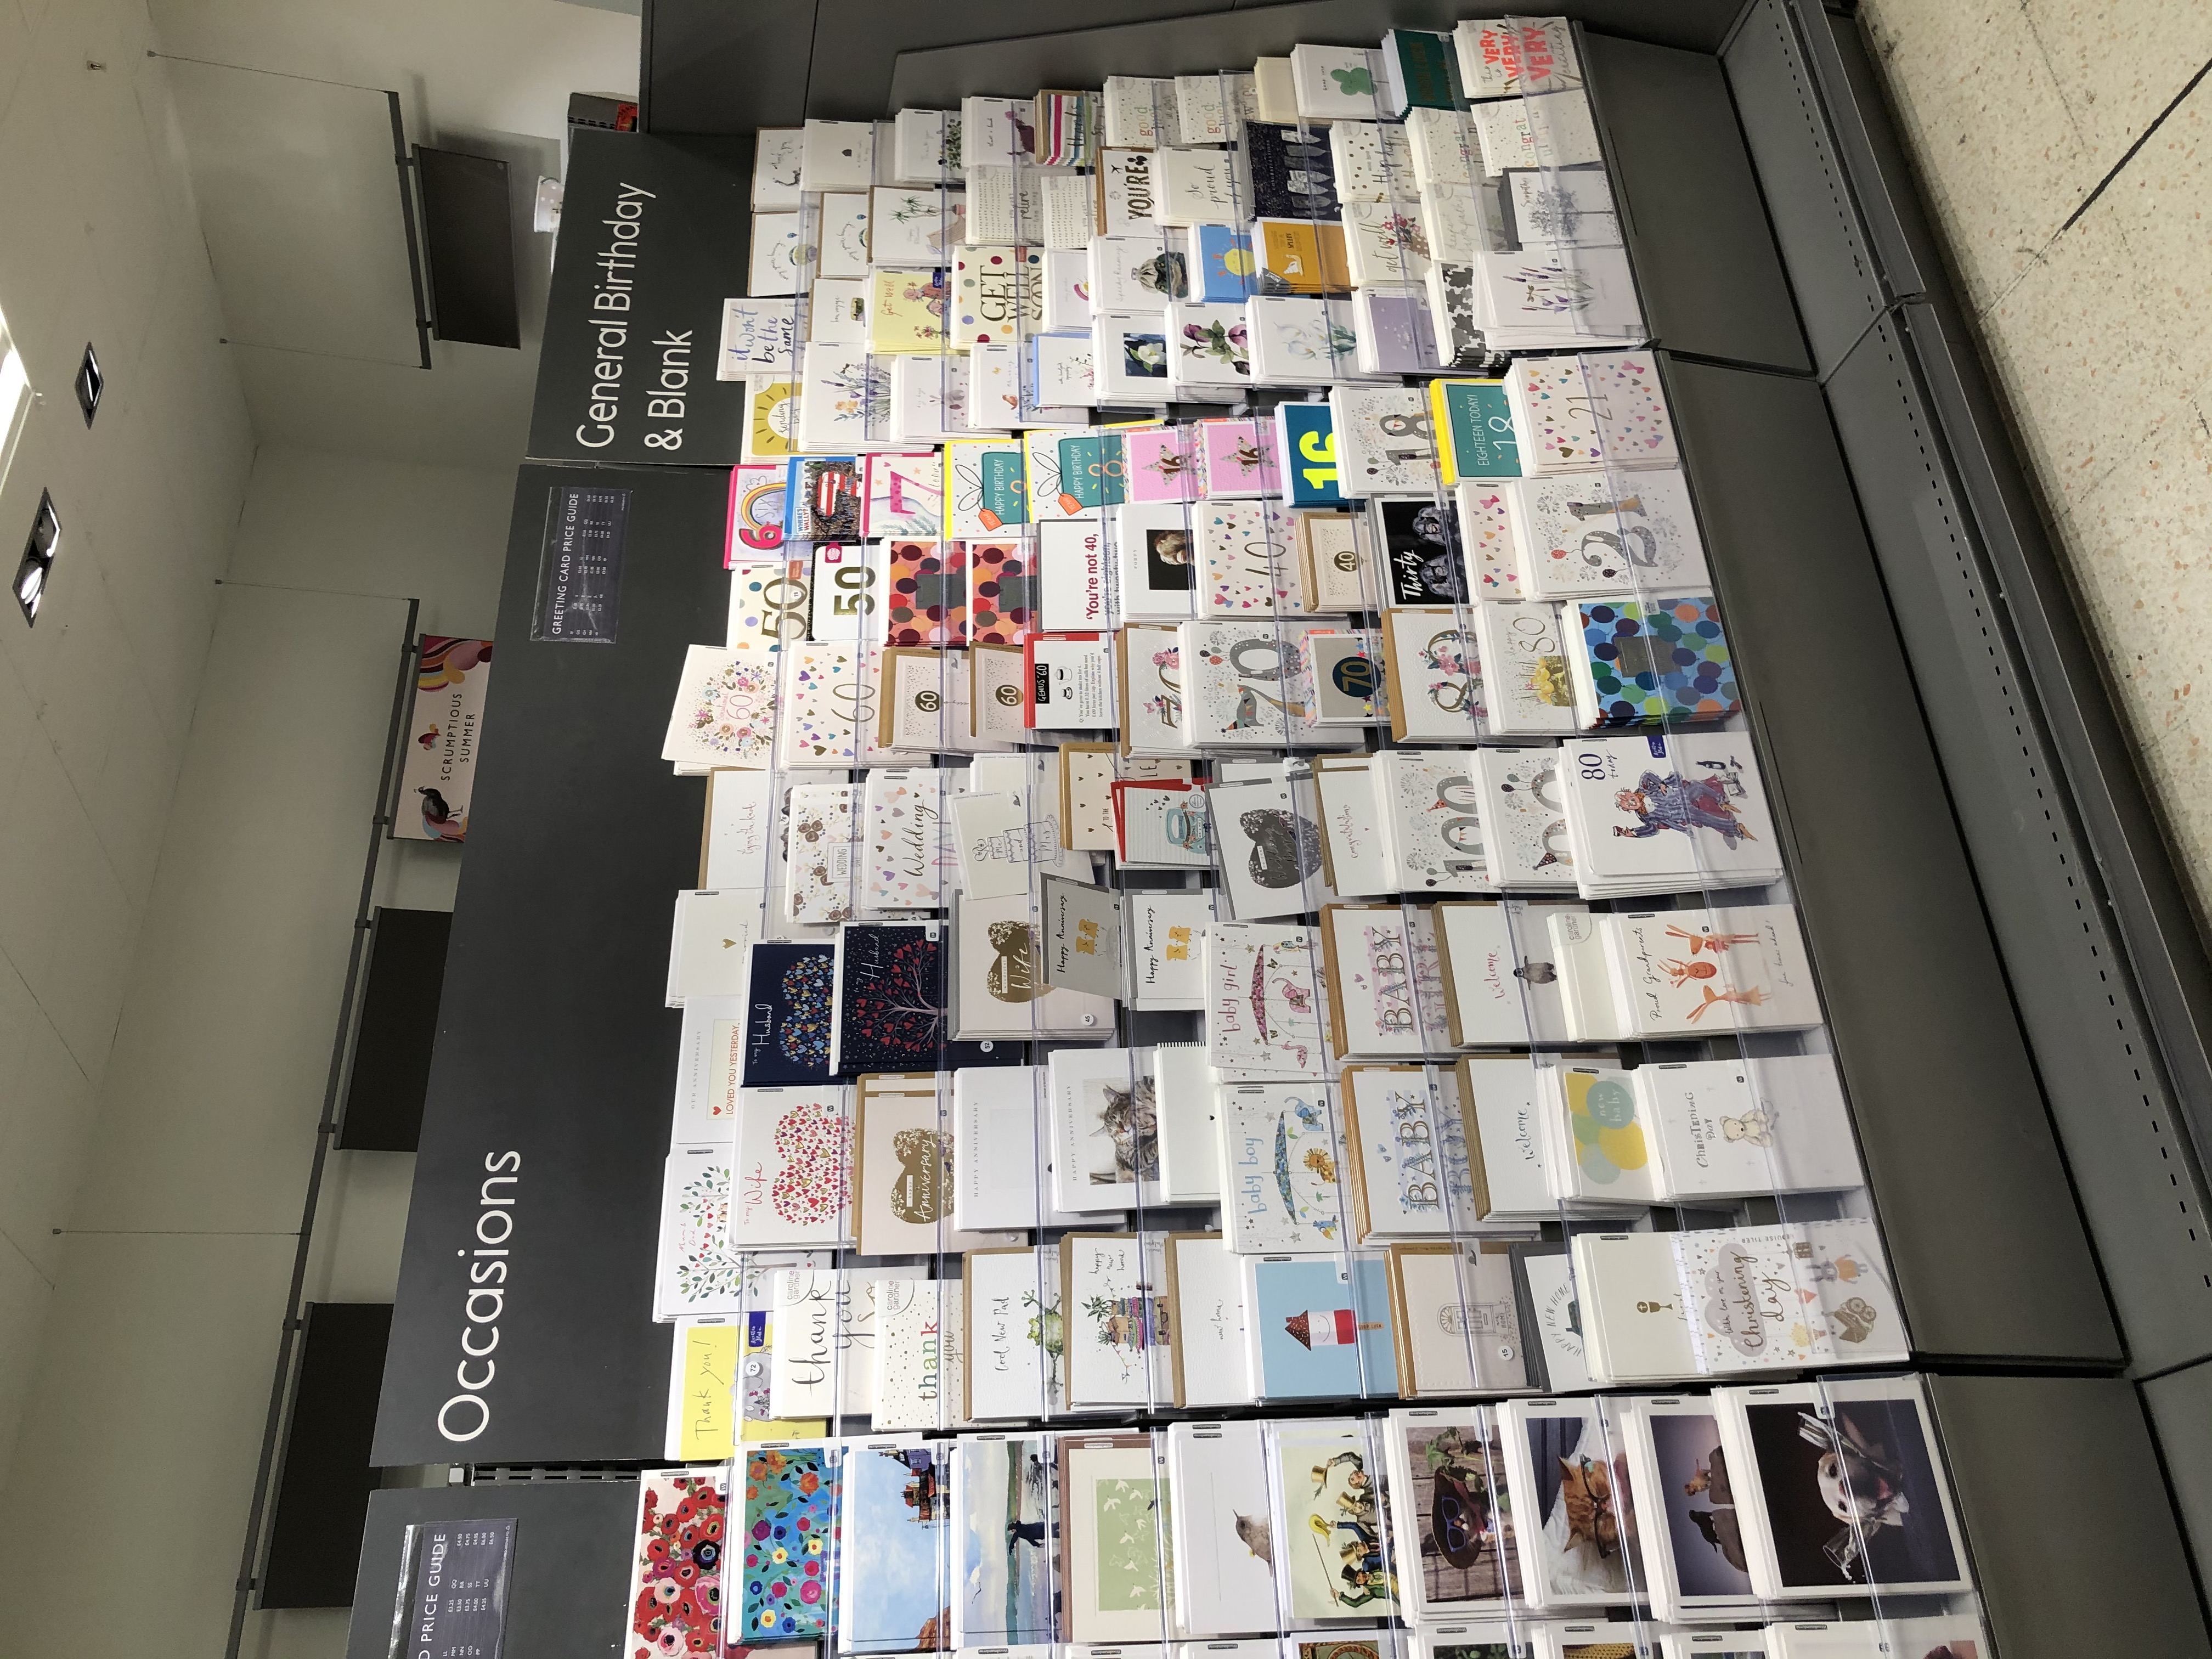 Above: The new card selection has gone into both Waitrose’s food & home stores as well as its smaller format locations.